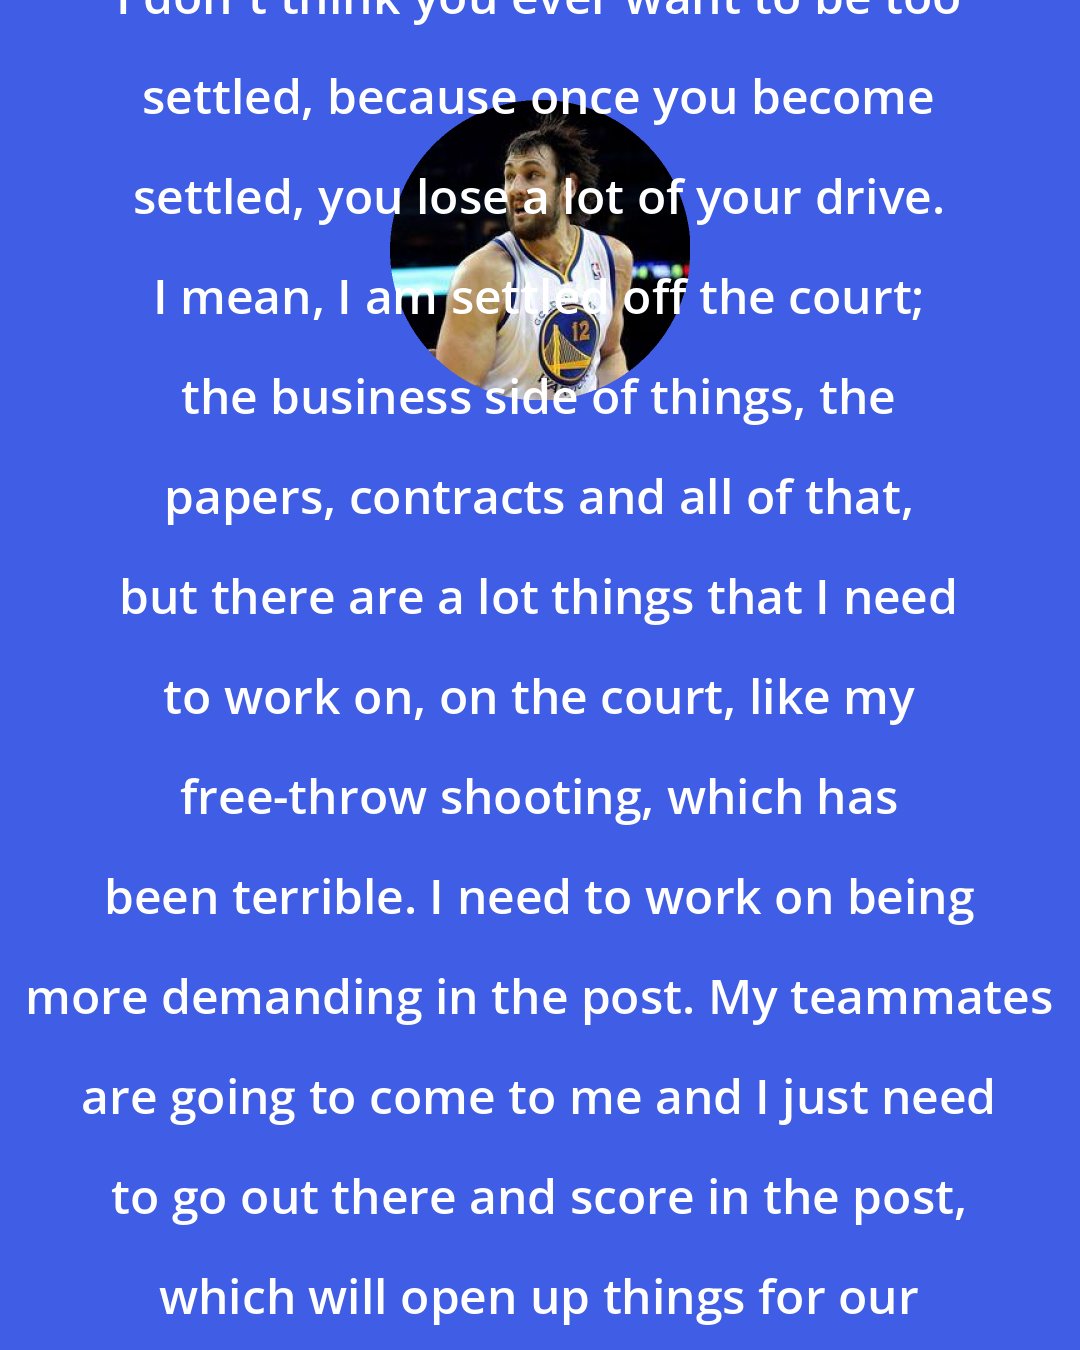 Andrew Bogut: I don't think you ever want to be too settled, because once you become settled, you lose a lot of your drive. I mean, I am settled off the court; the business side of things, the papers, contracts and all of that, but there are a lot things that I need to work on, on the court, like my free-throw shooting, which has been terrible. I need to work on being more demanding in the post. My teammates are going to come to me and I just need to go out there and score in the post, which will open up things for our guards.